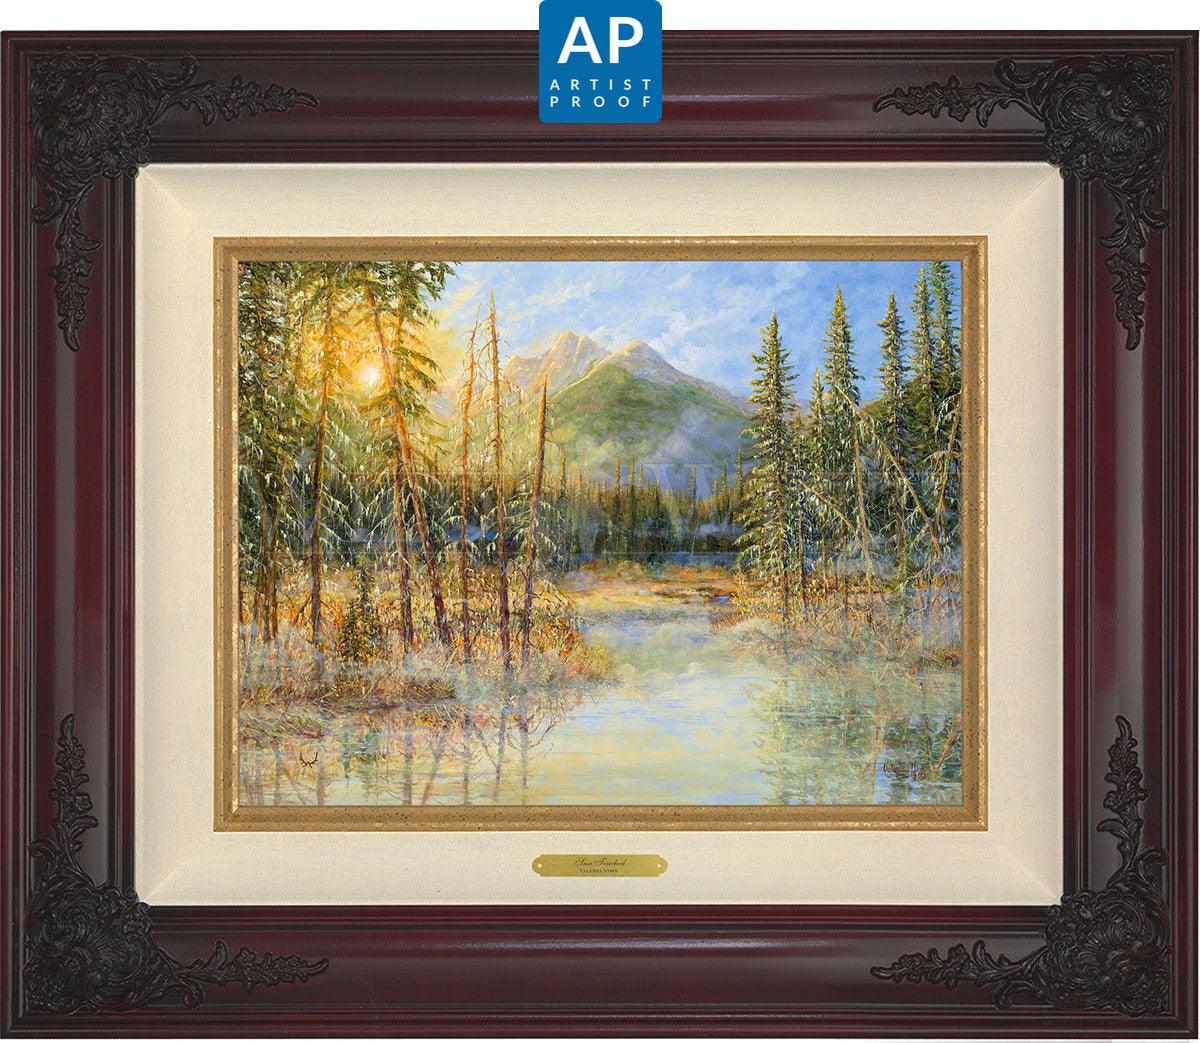 Sun Touched; Artist Proof Edition (AP) Master Artisan Canvas - Wild Wings